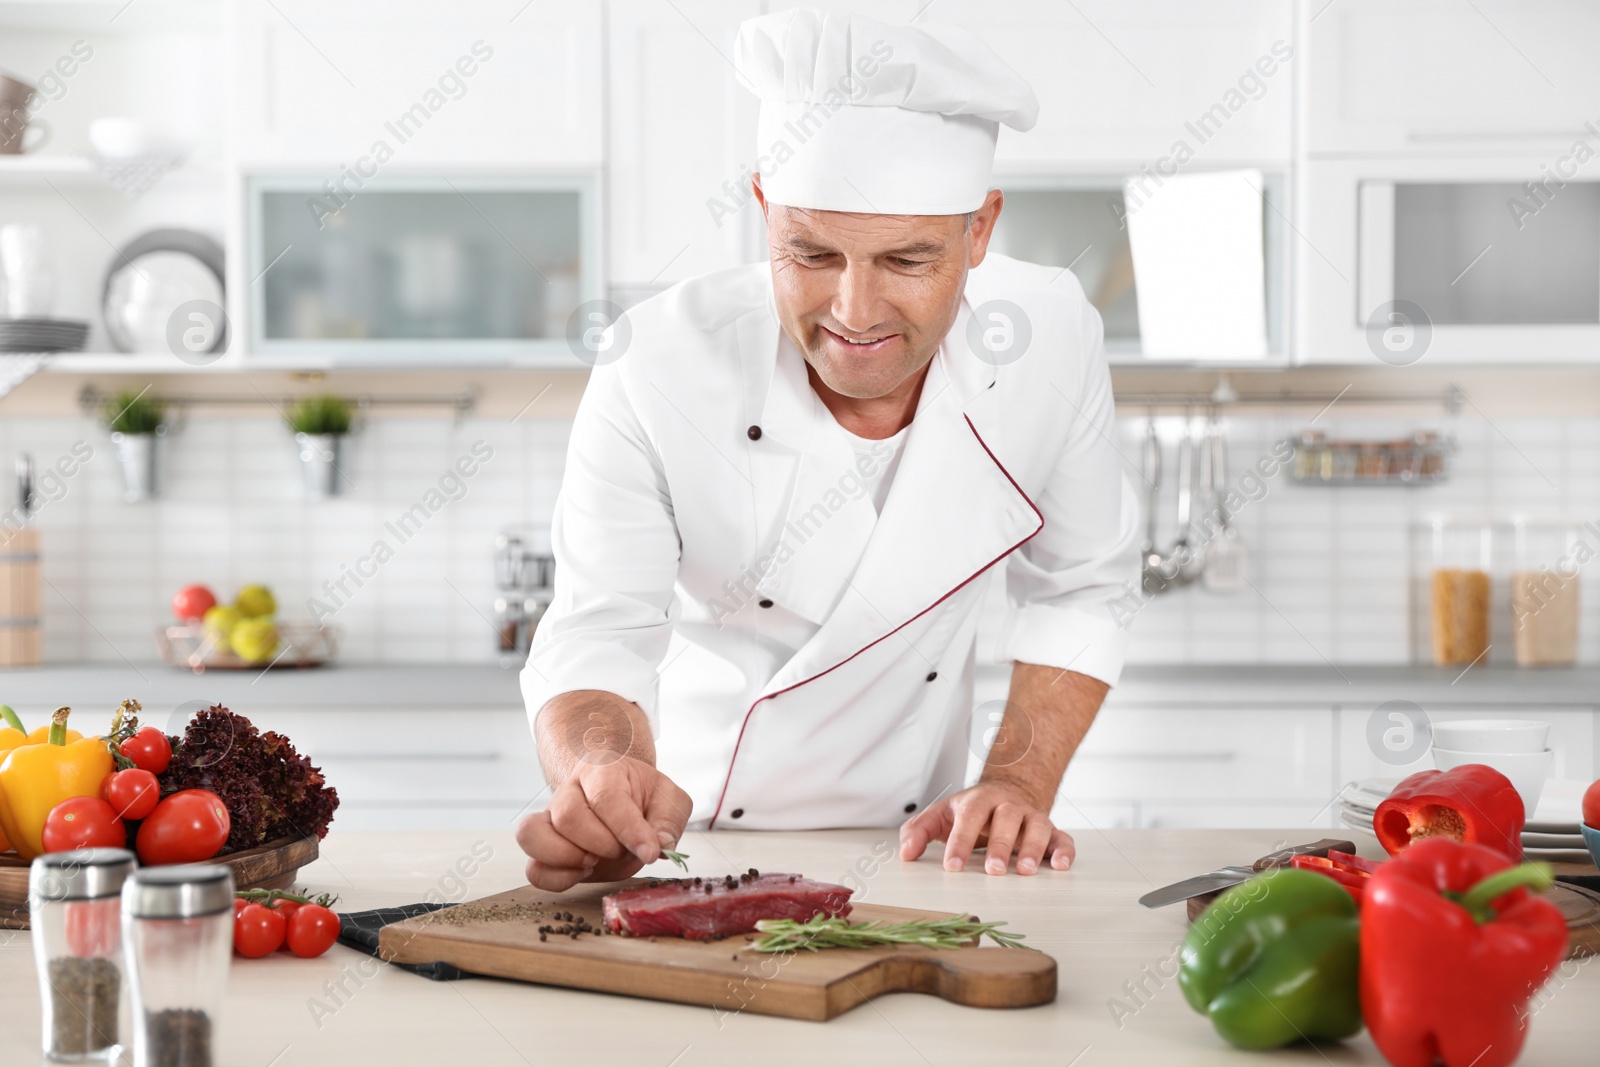 Photo of Professional chef cooking meat on table in kitchen